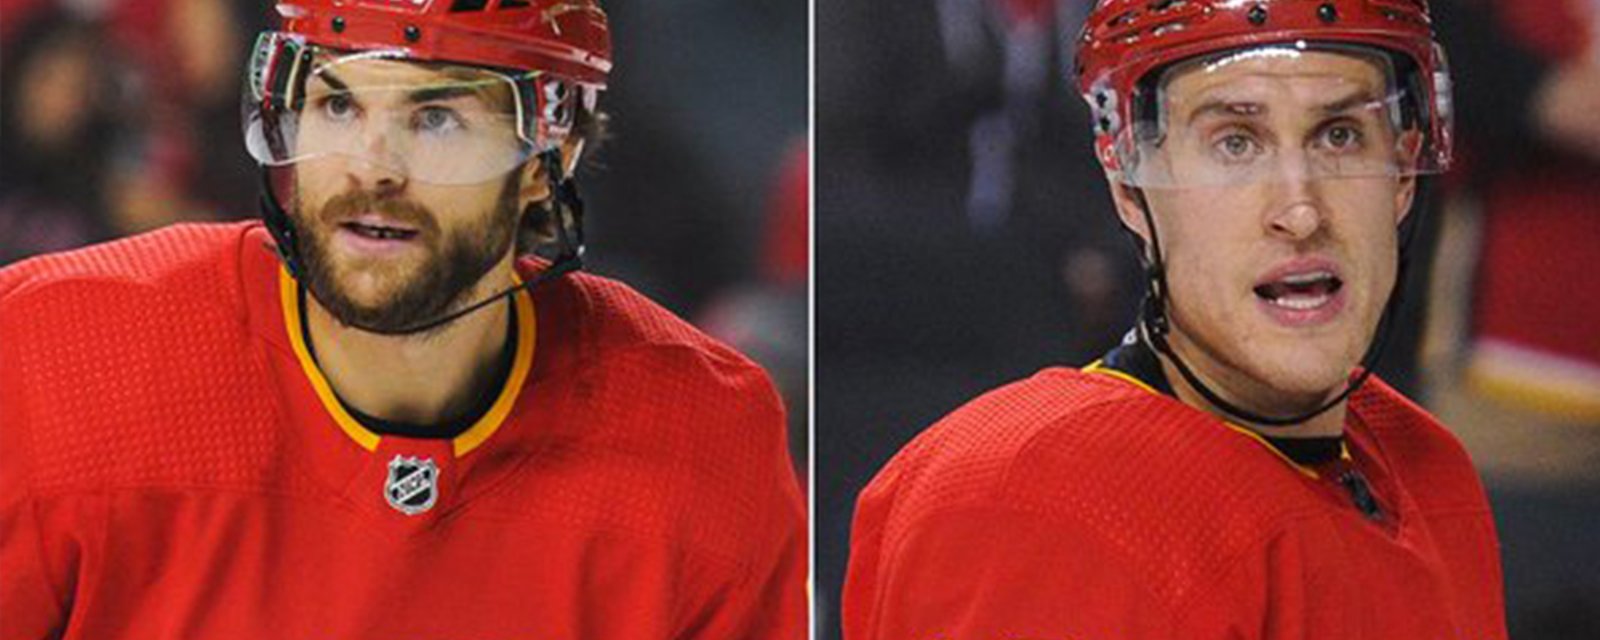 Injury Report: Flames place two players on IR, Stone out long-term